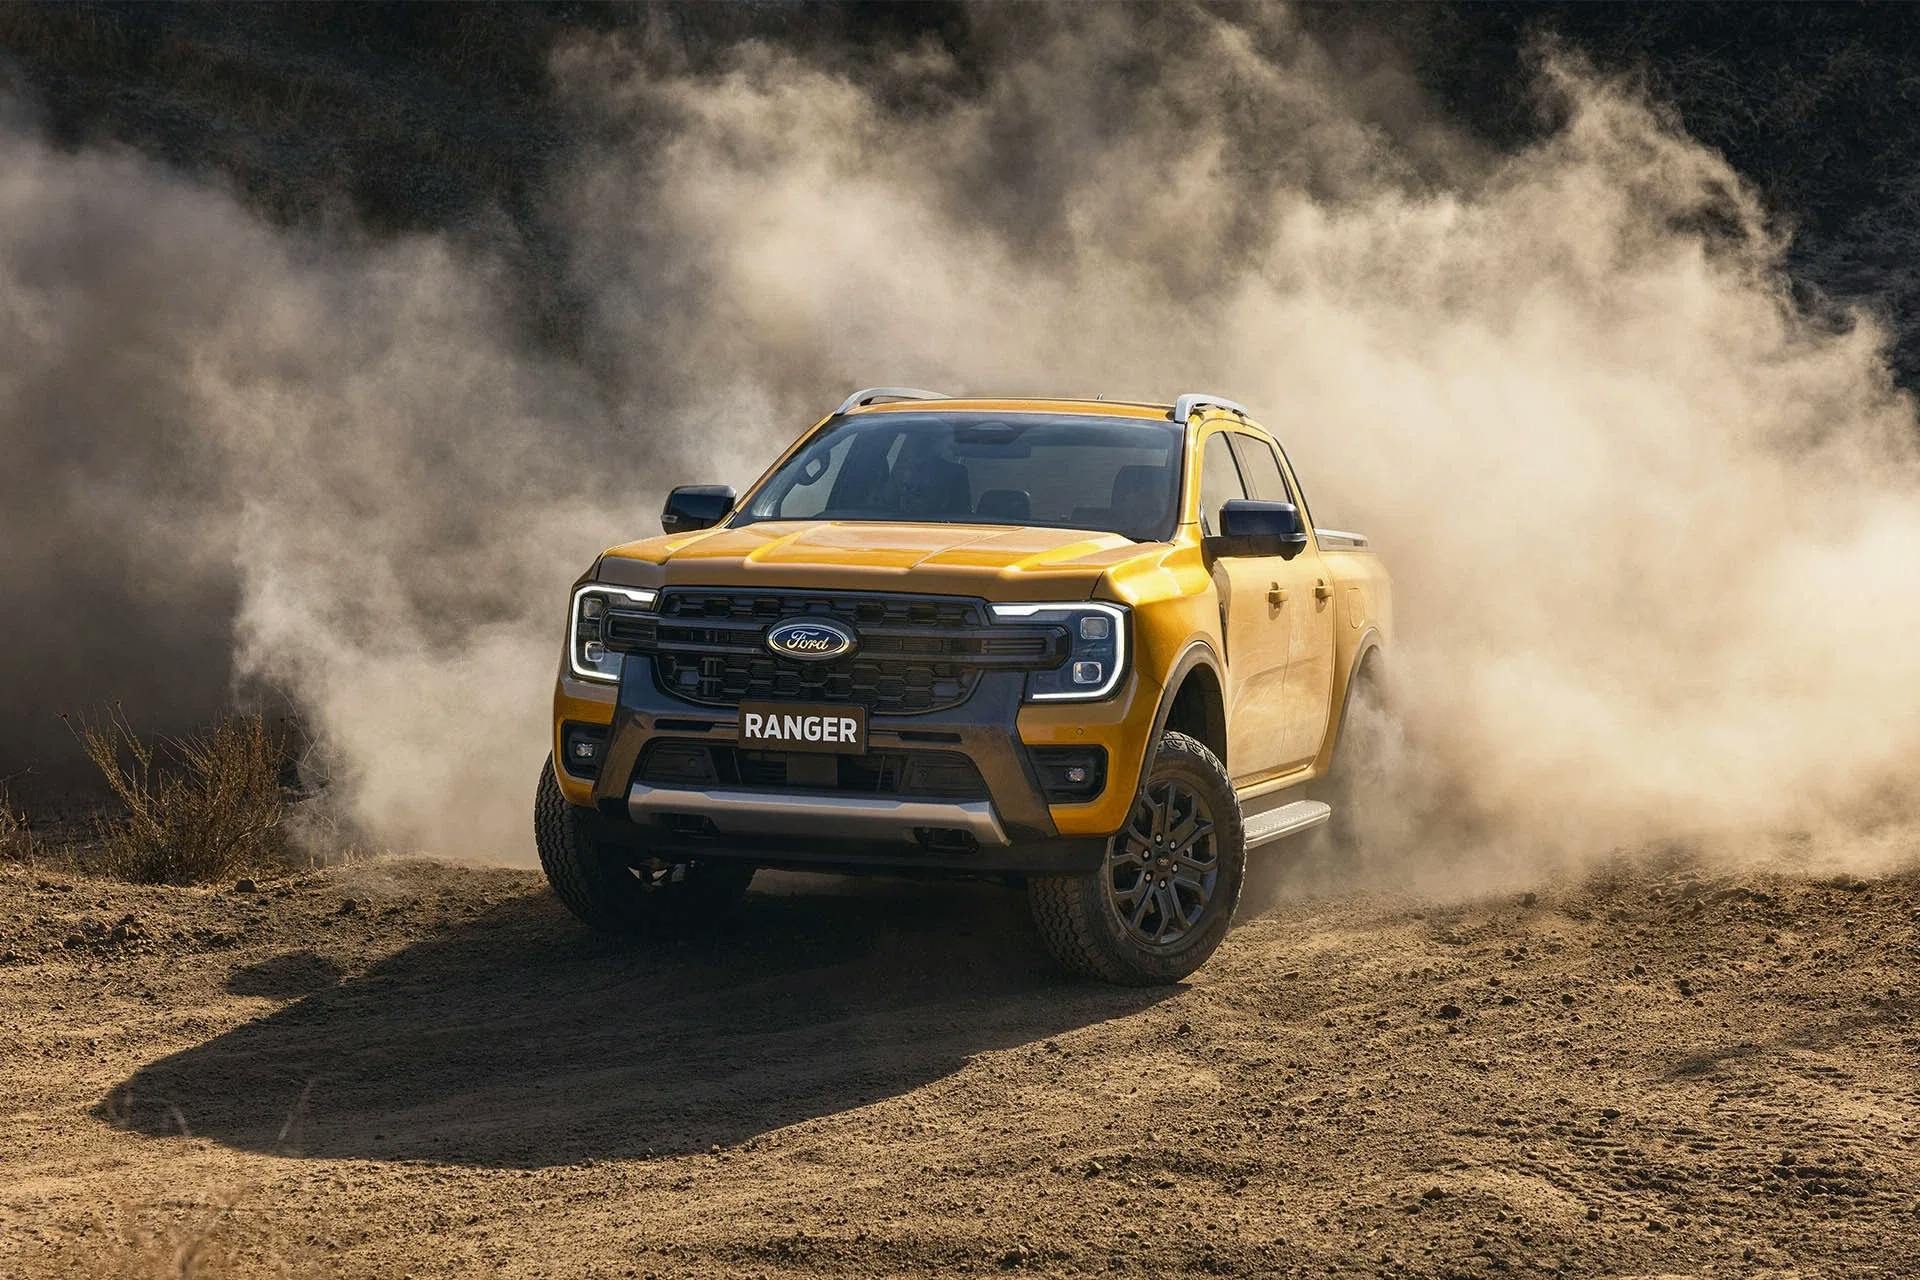 https://wsa-website-assets.s3.amazonaws.com/assets/images/How-Much-Does-the-New-Ranger-Sport-Cost.webp